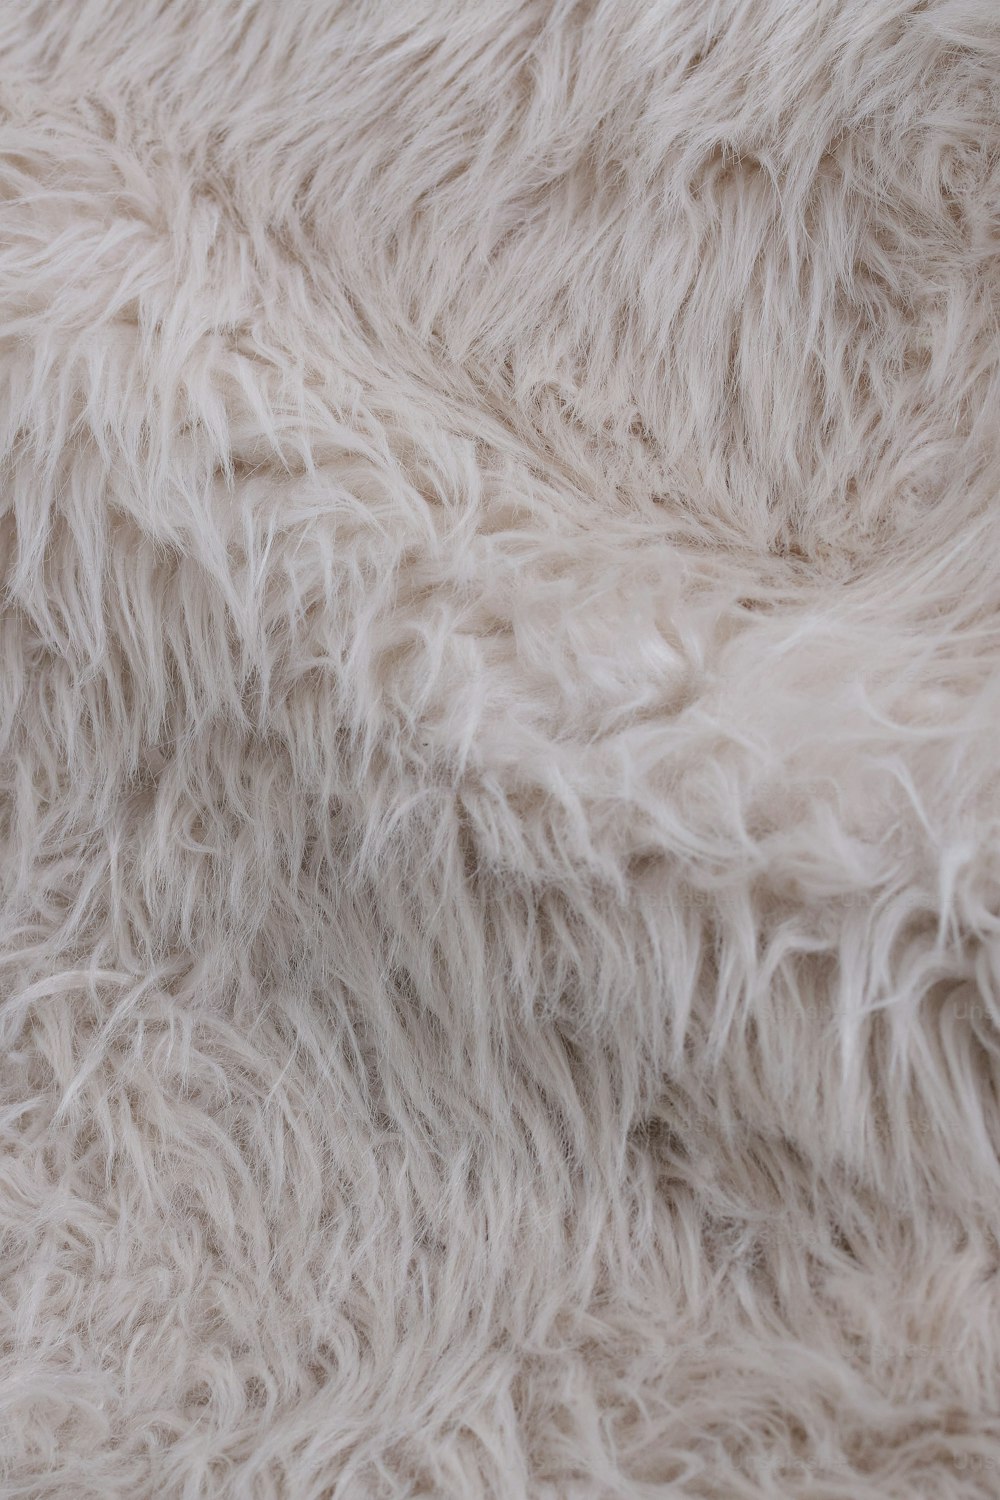 a close up view of a white fur texture